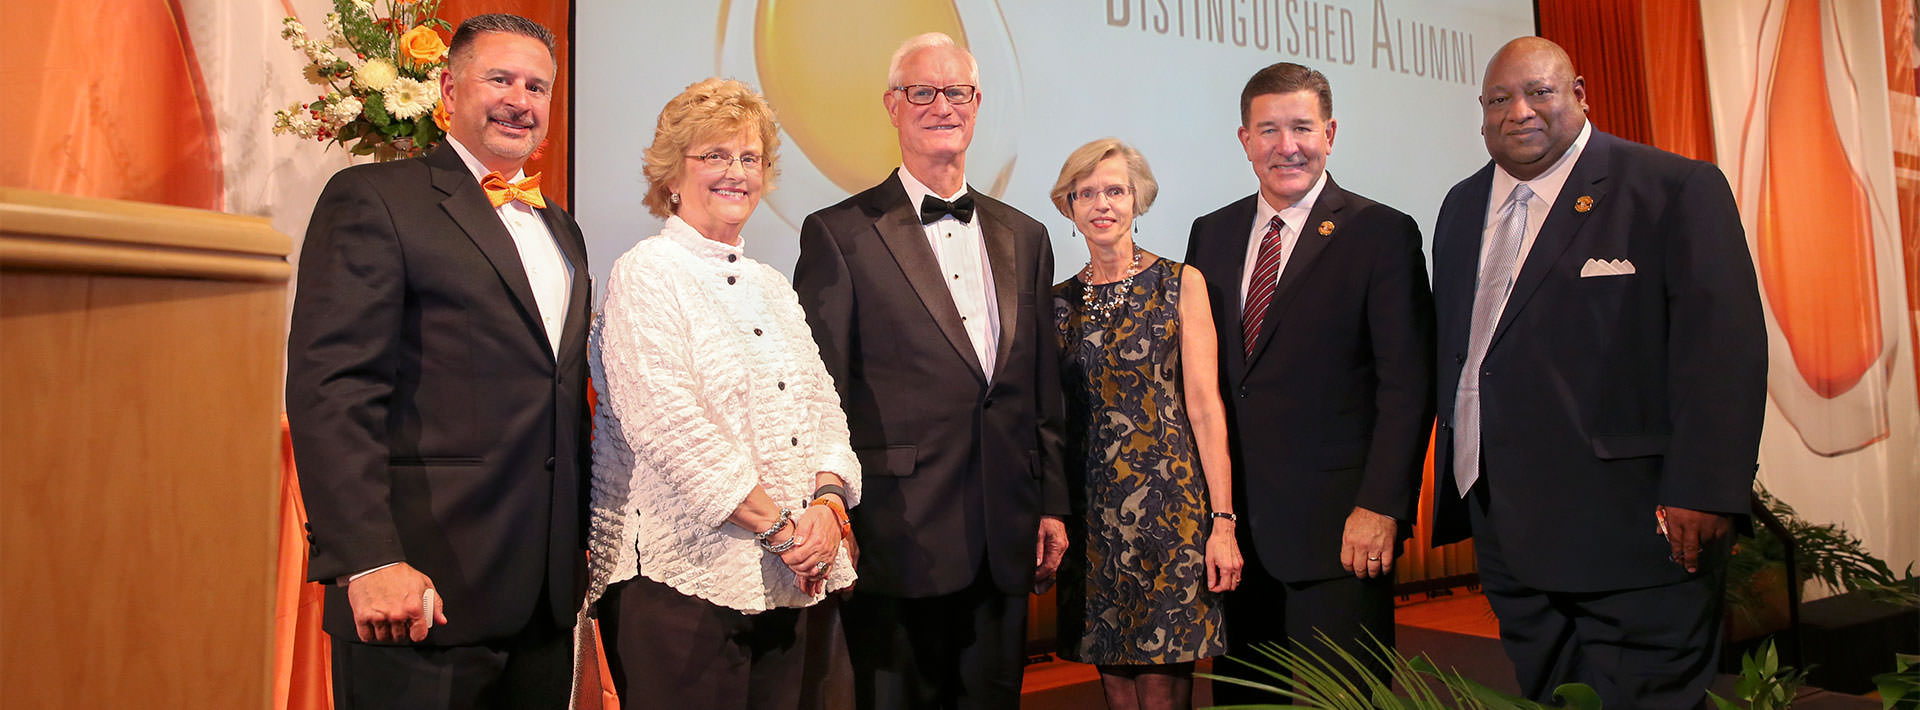 Academy of Distinguished Alumni welcomes four